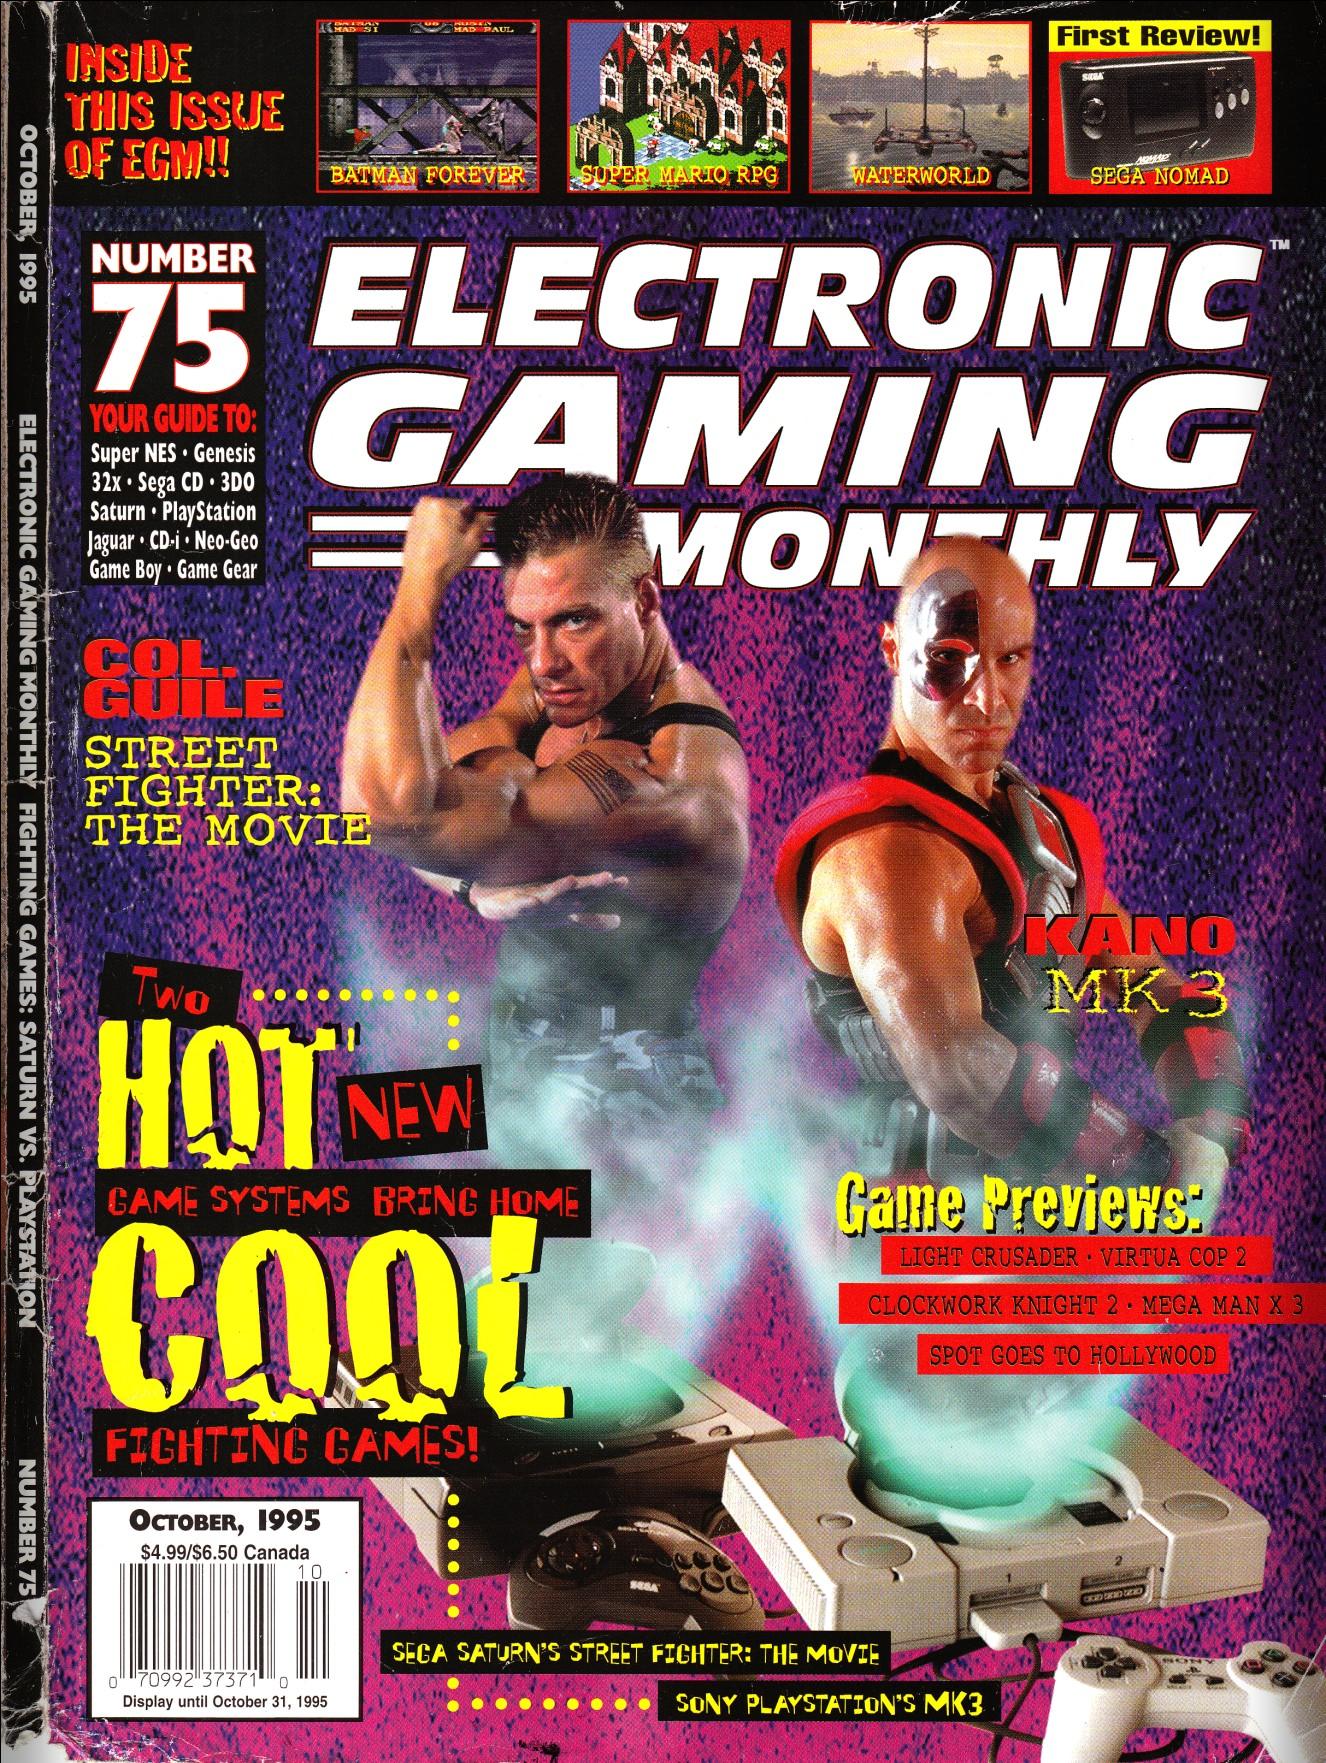 Electronic Gaming Monthly's Top 8 Dead or Alive Games 